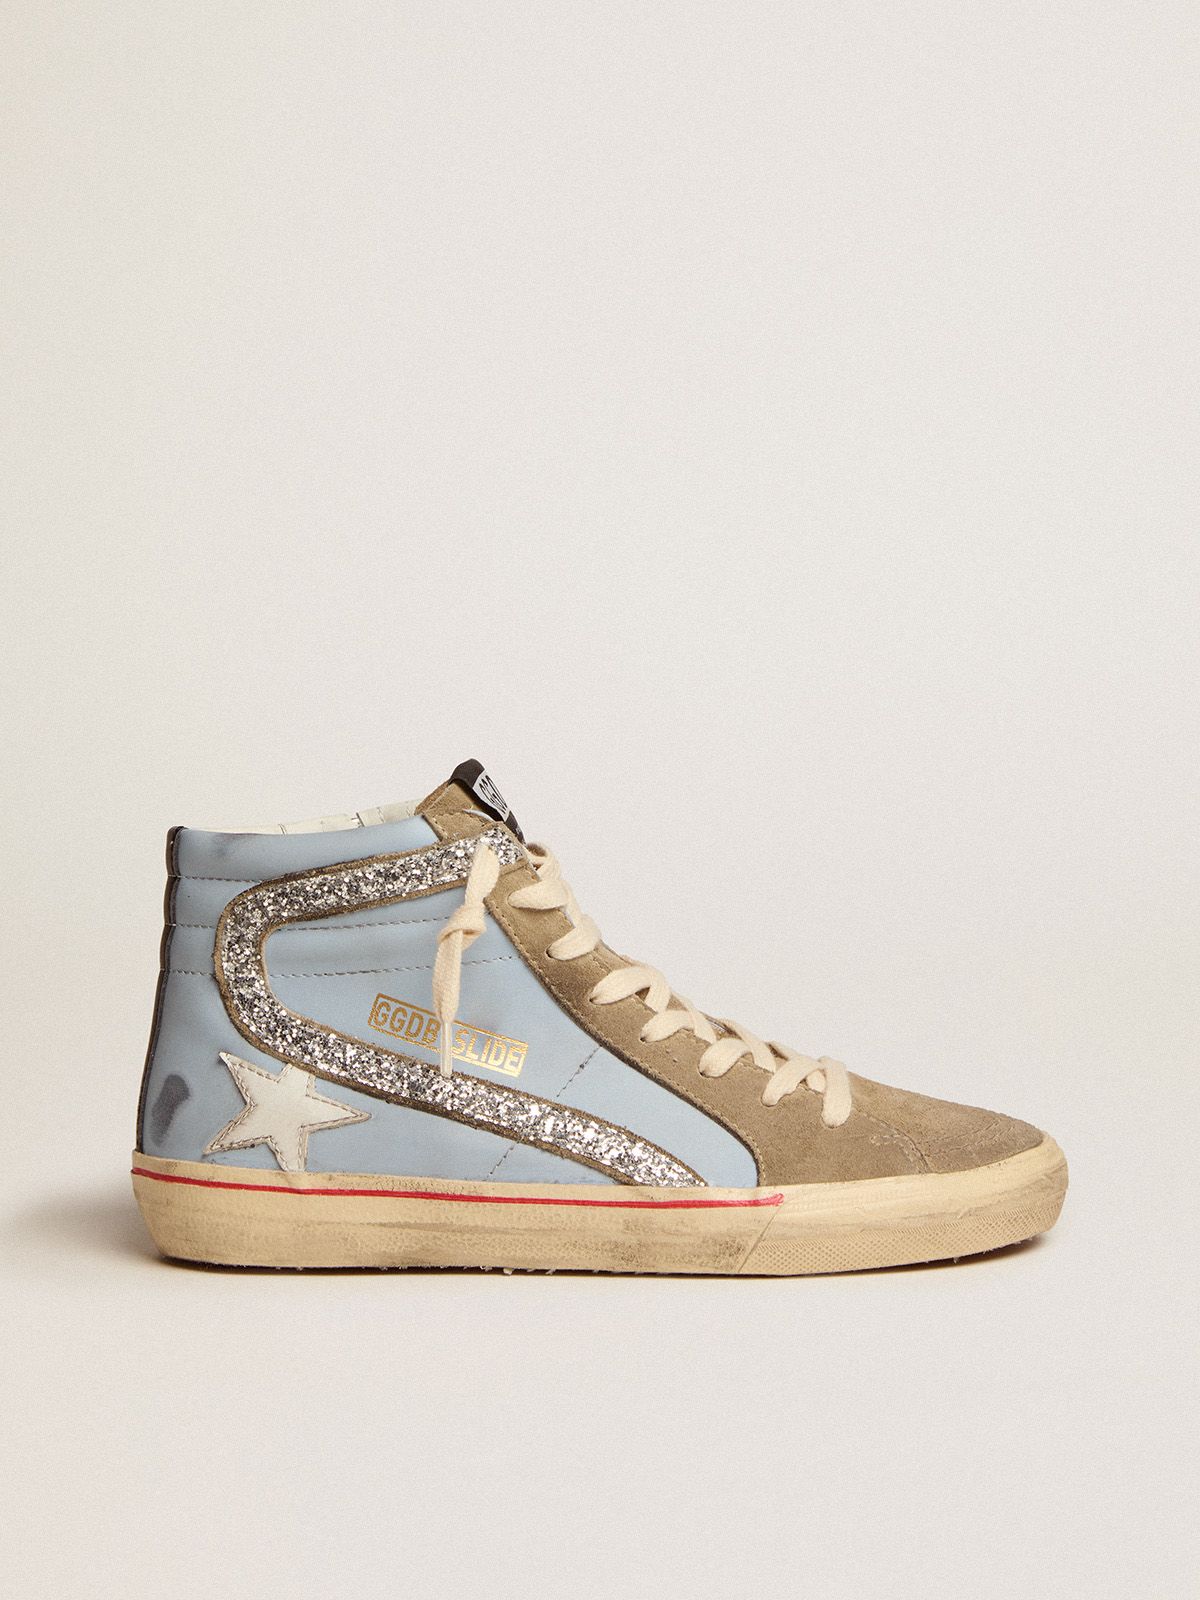 golden goose silver in dove-gray leather with Slide and powder-blue flash tongue suede glitter sneakers